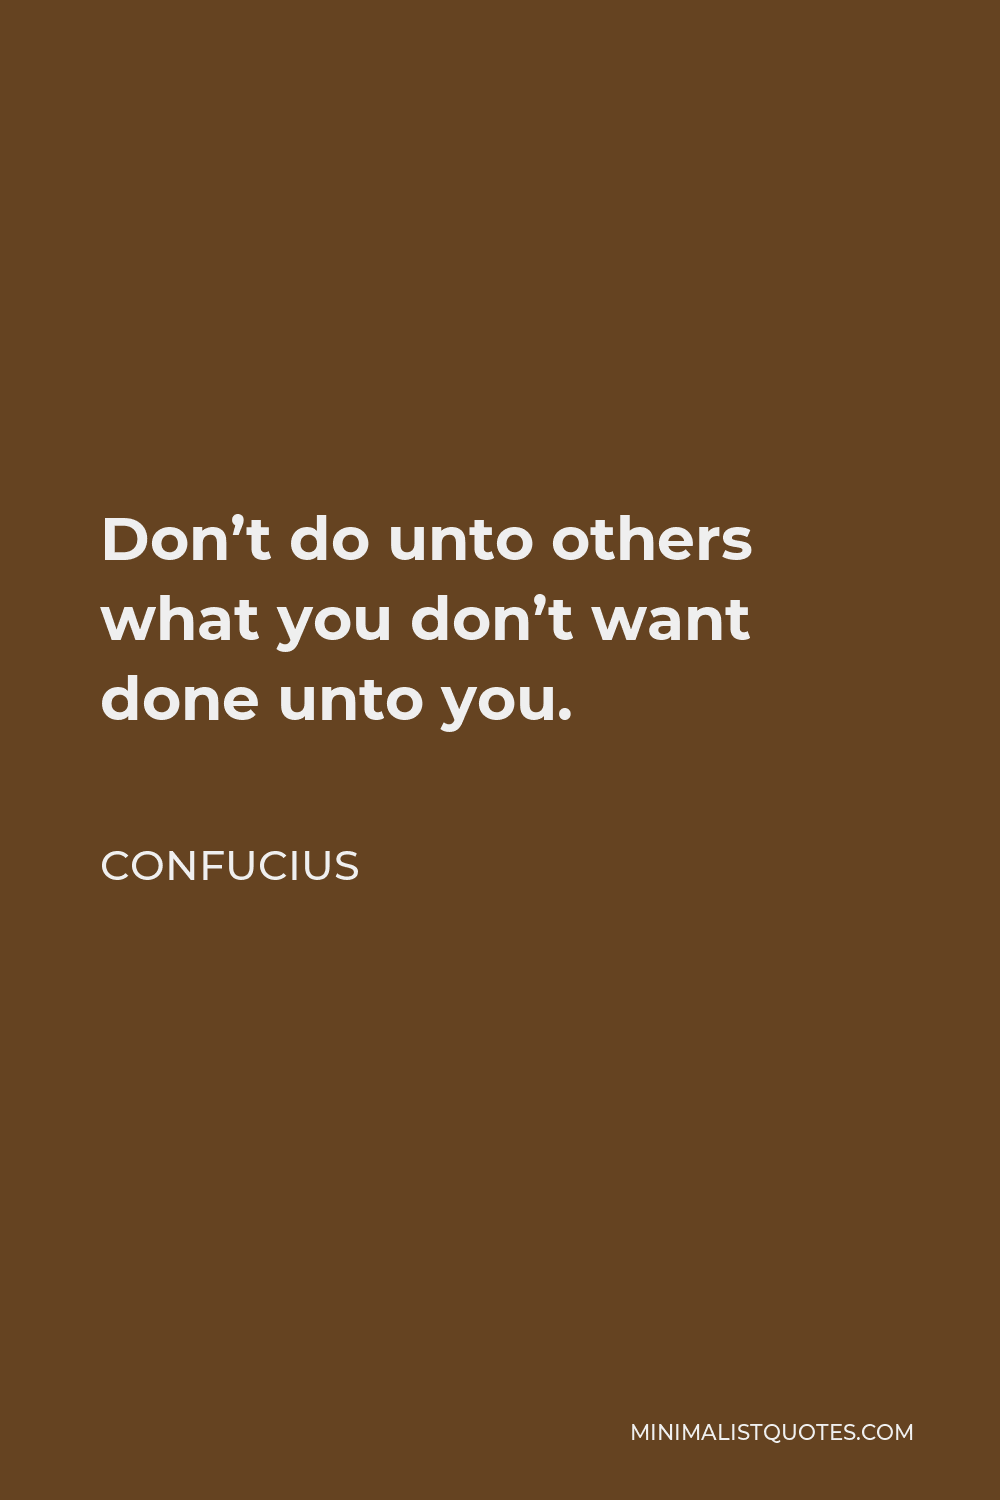 Confucius Quote - Don’t do unto others what you don’t want done unto you.